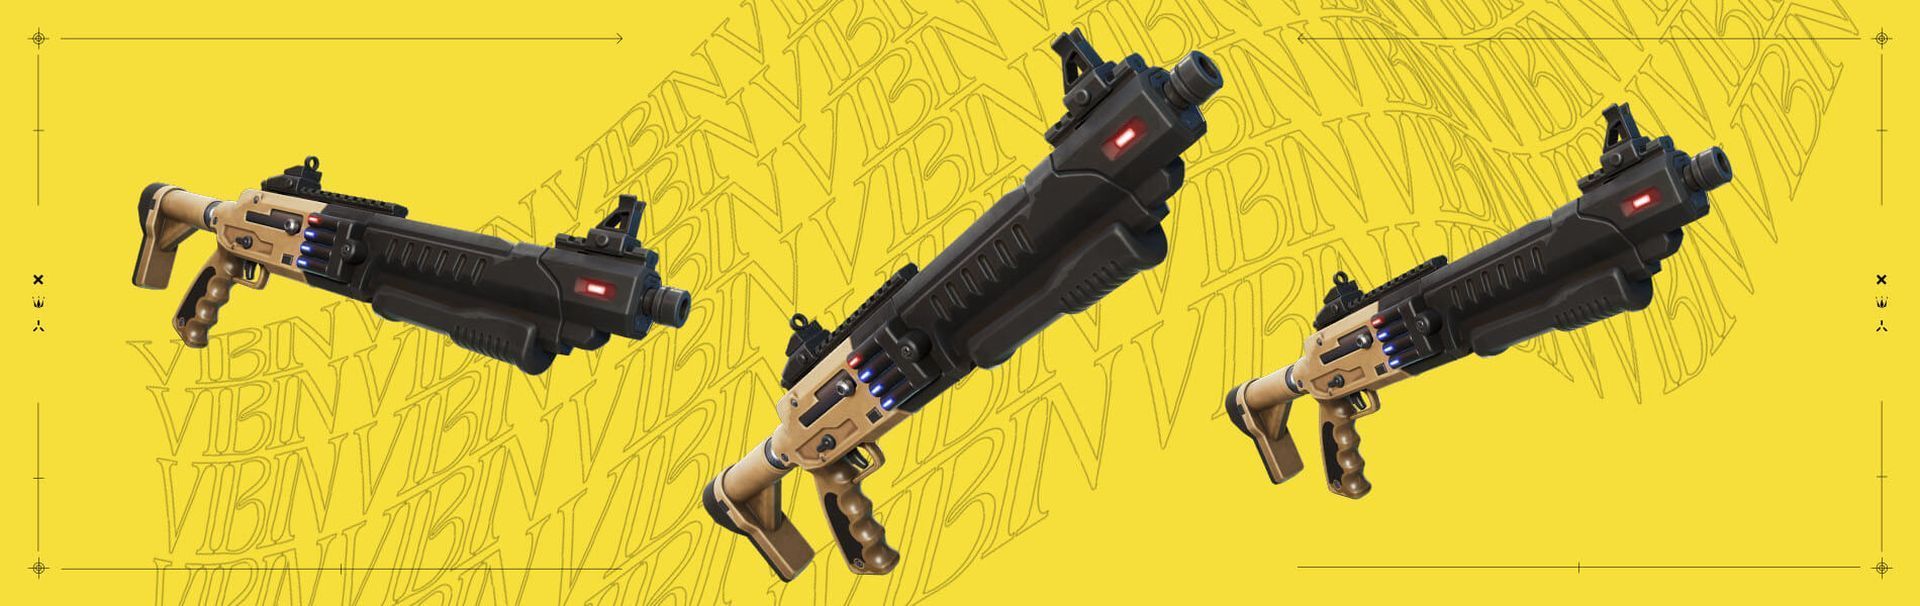 In this article, we are going to be covering where to get the new prime shotgun Fortnite, so you can enjoy this brand-new weapon in the game.